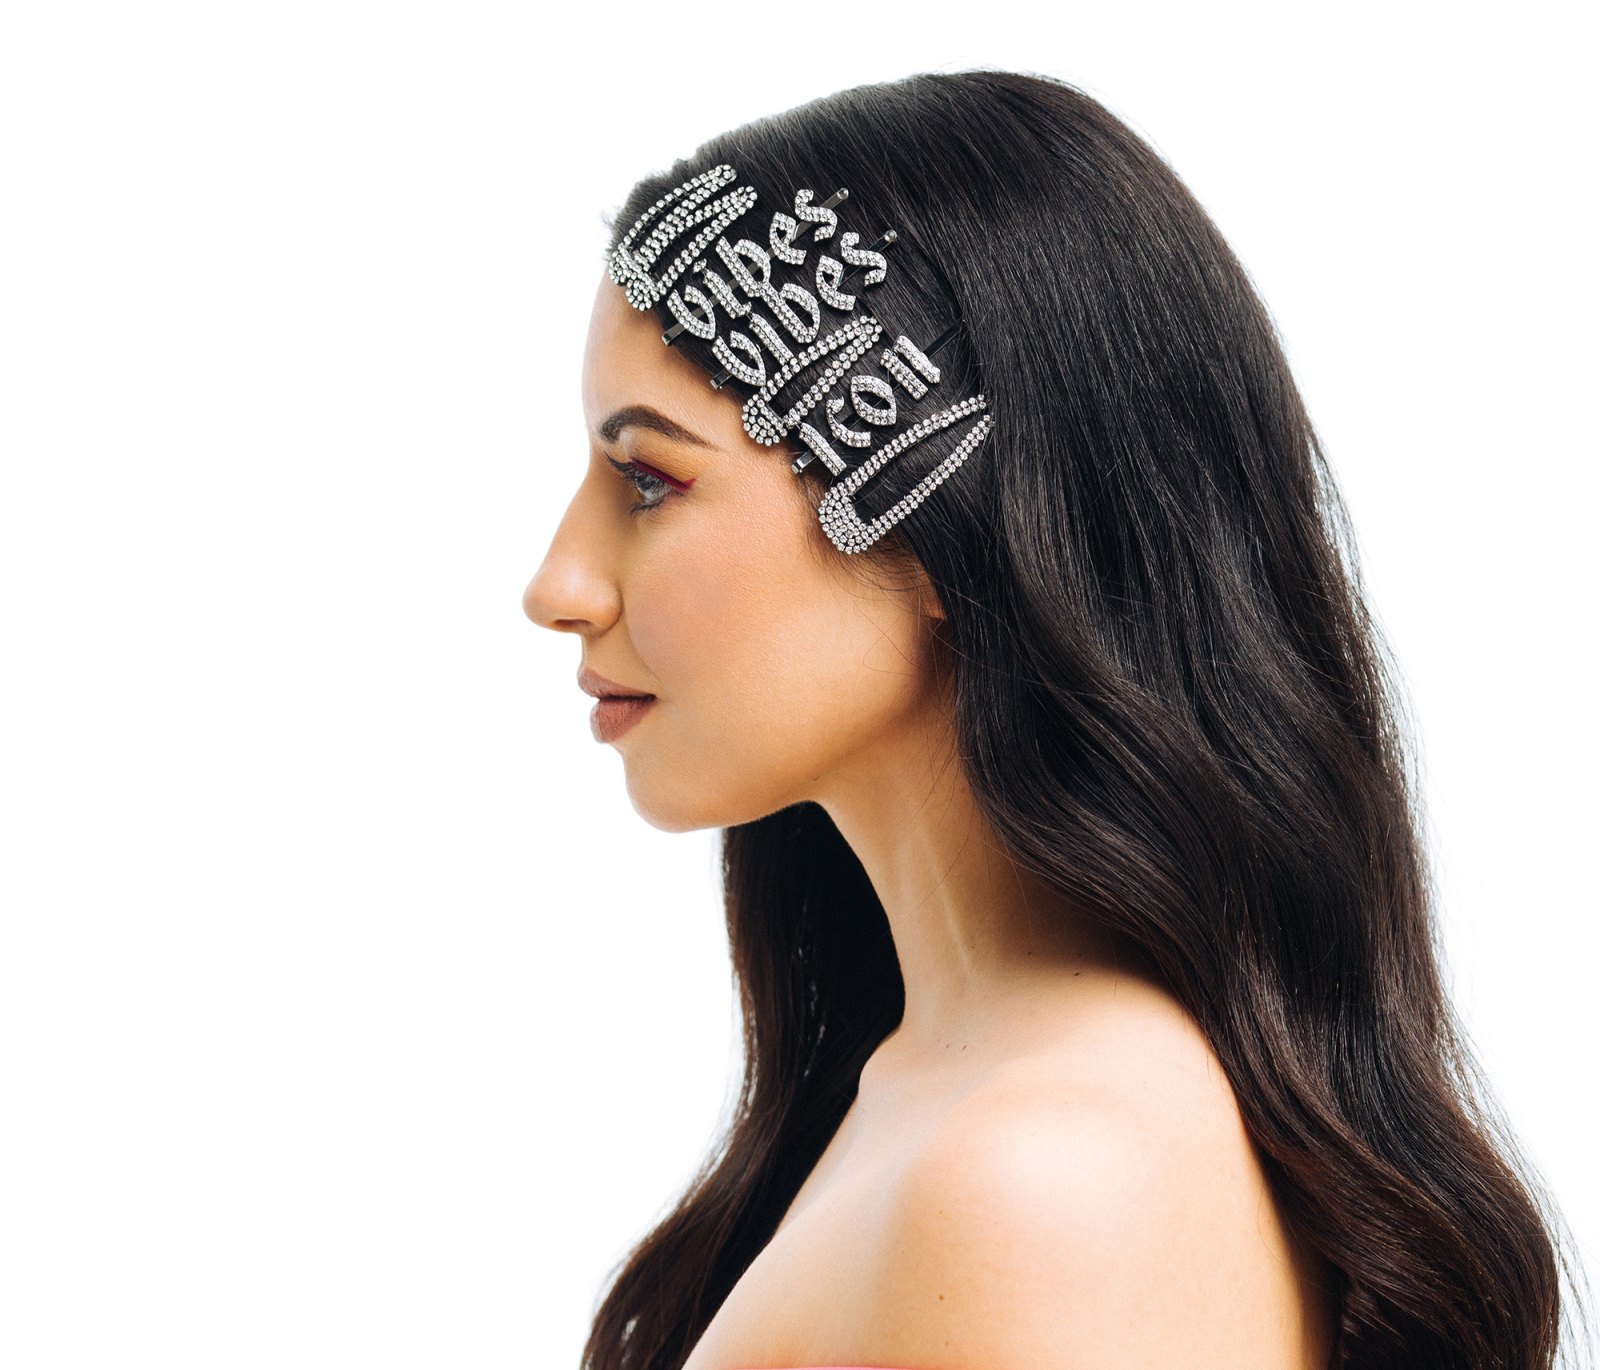 Justin Marjan Has New Hair Accessories to Take Over Your Insta Feed